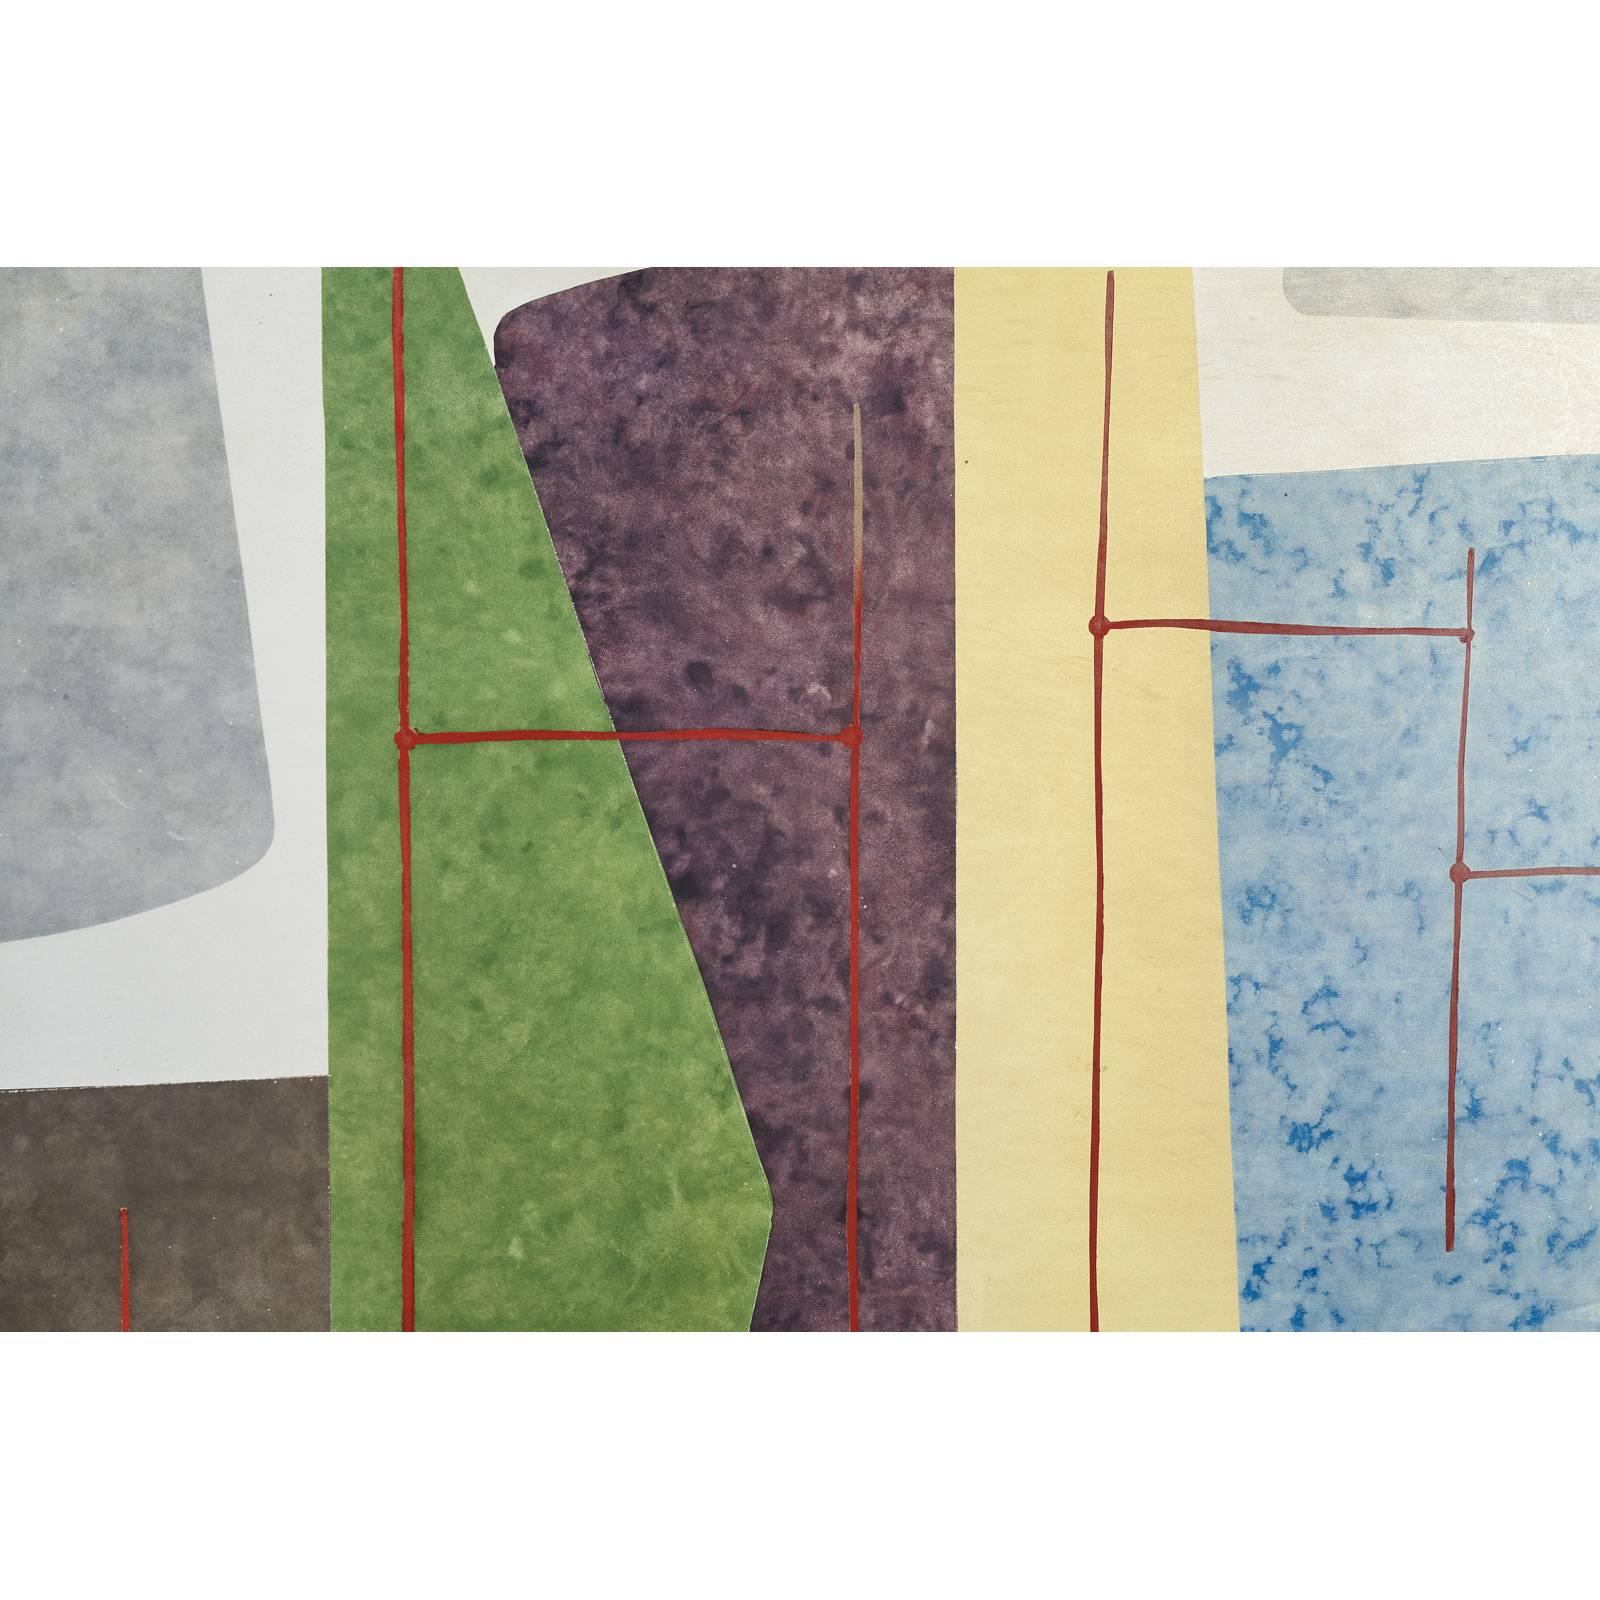 French Abstract Composition, Mixed-Media on Aluminium by Robert Pansart, France, 1956